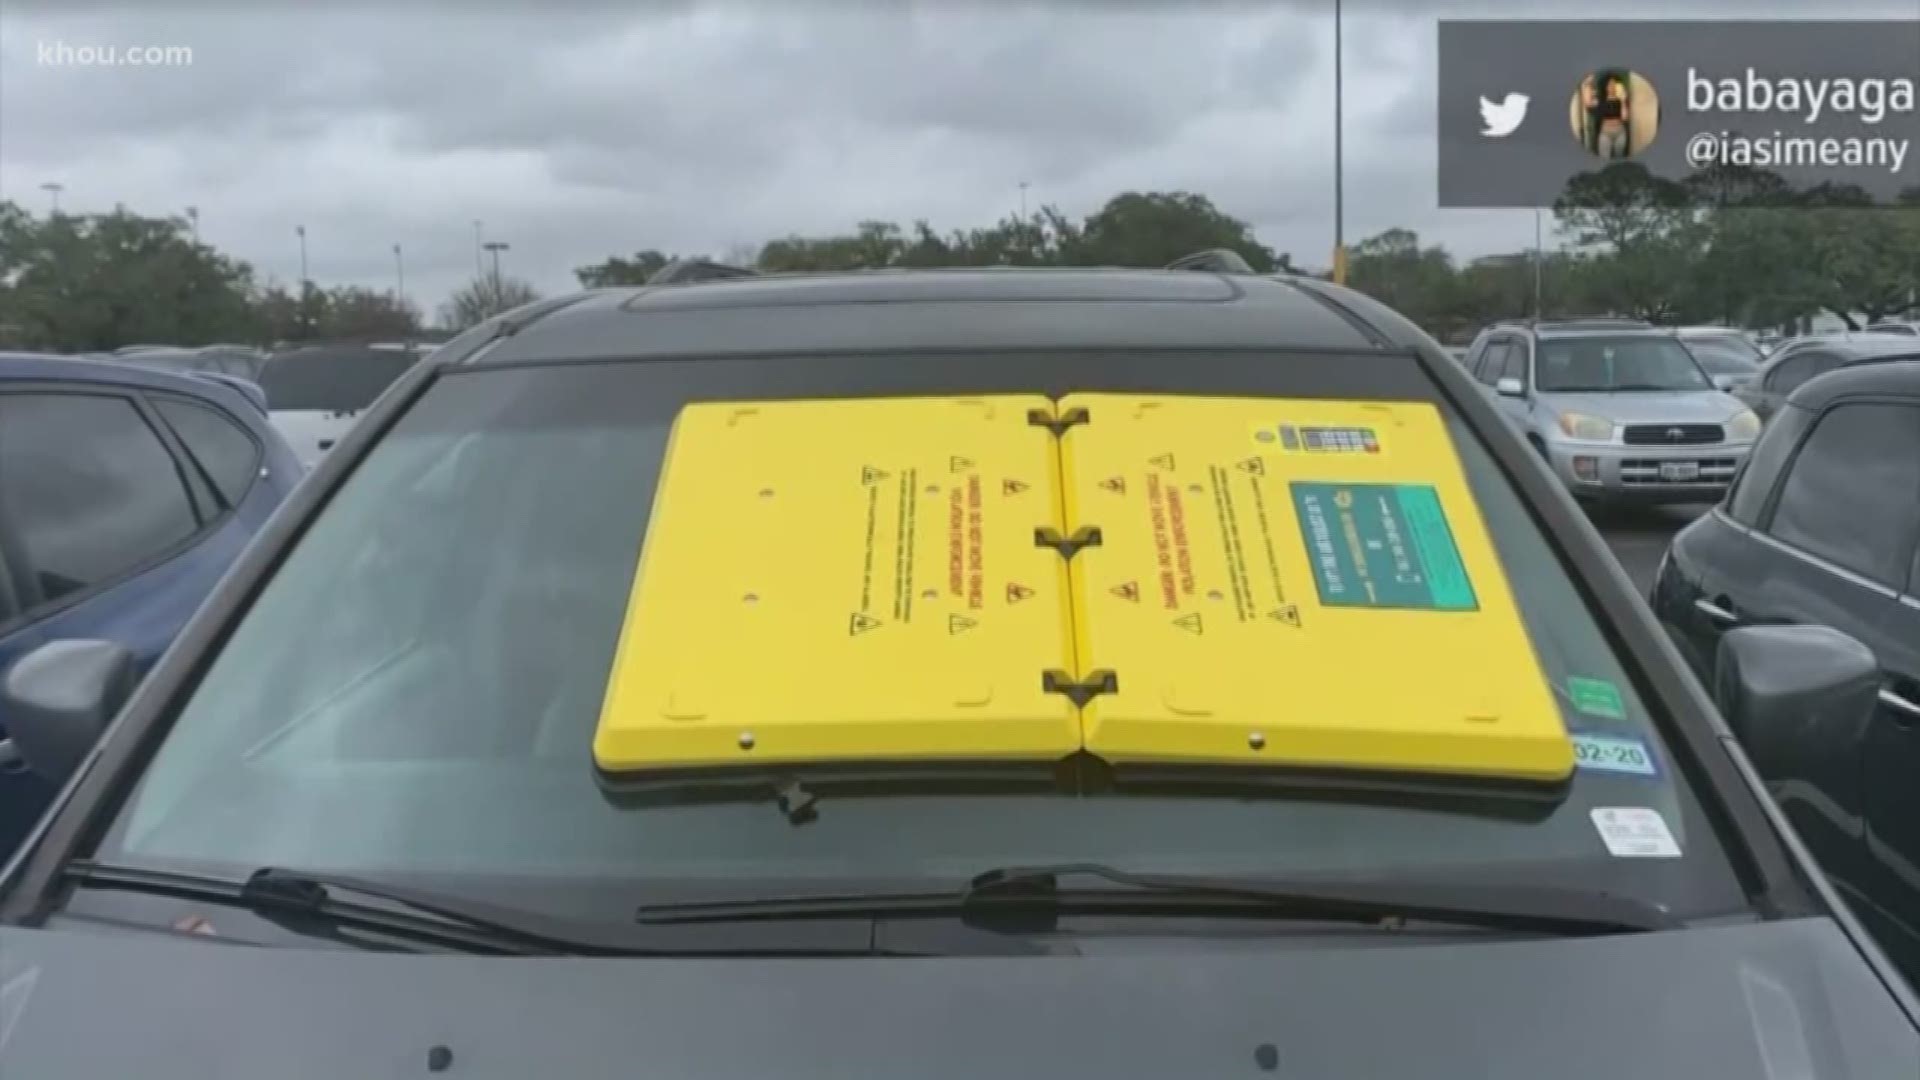 'The Barnacle' is a boot-like device that is placed on the windshield and blocks the driver's view. It costs about $75 to remove and you can do it from your phone.